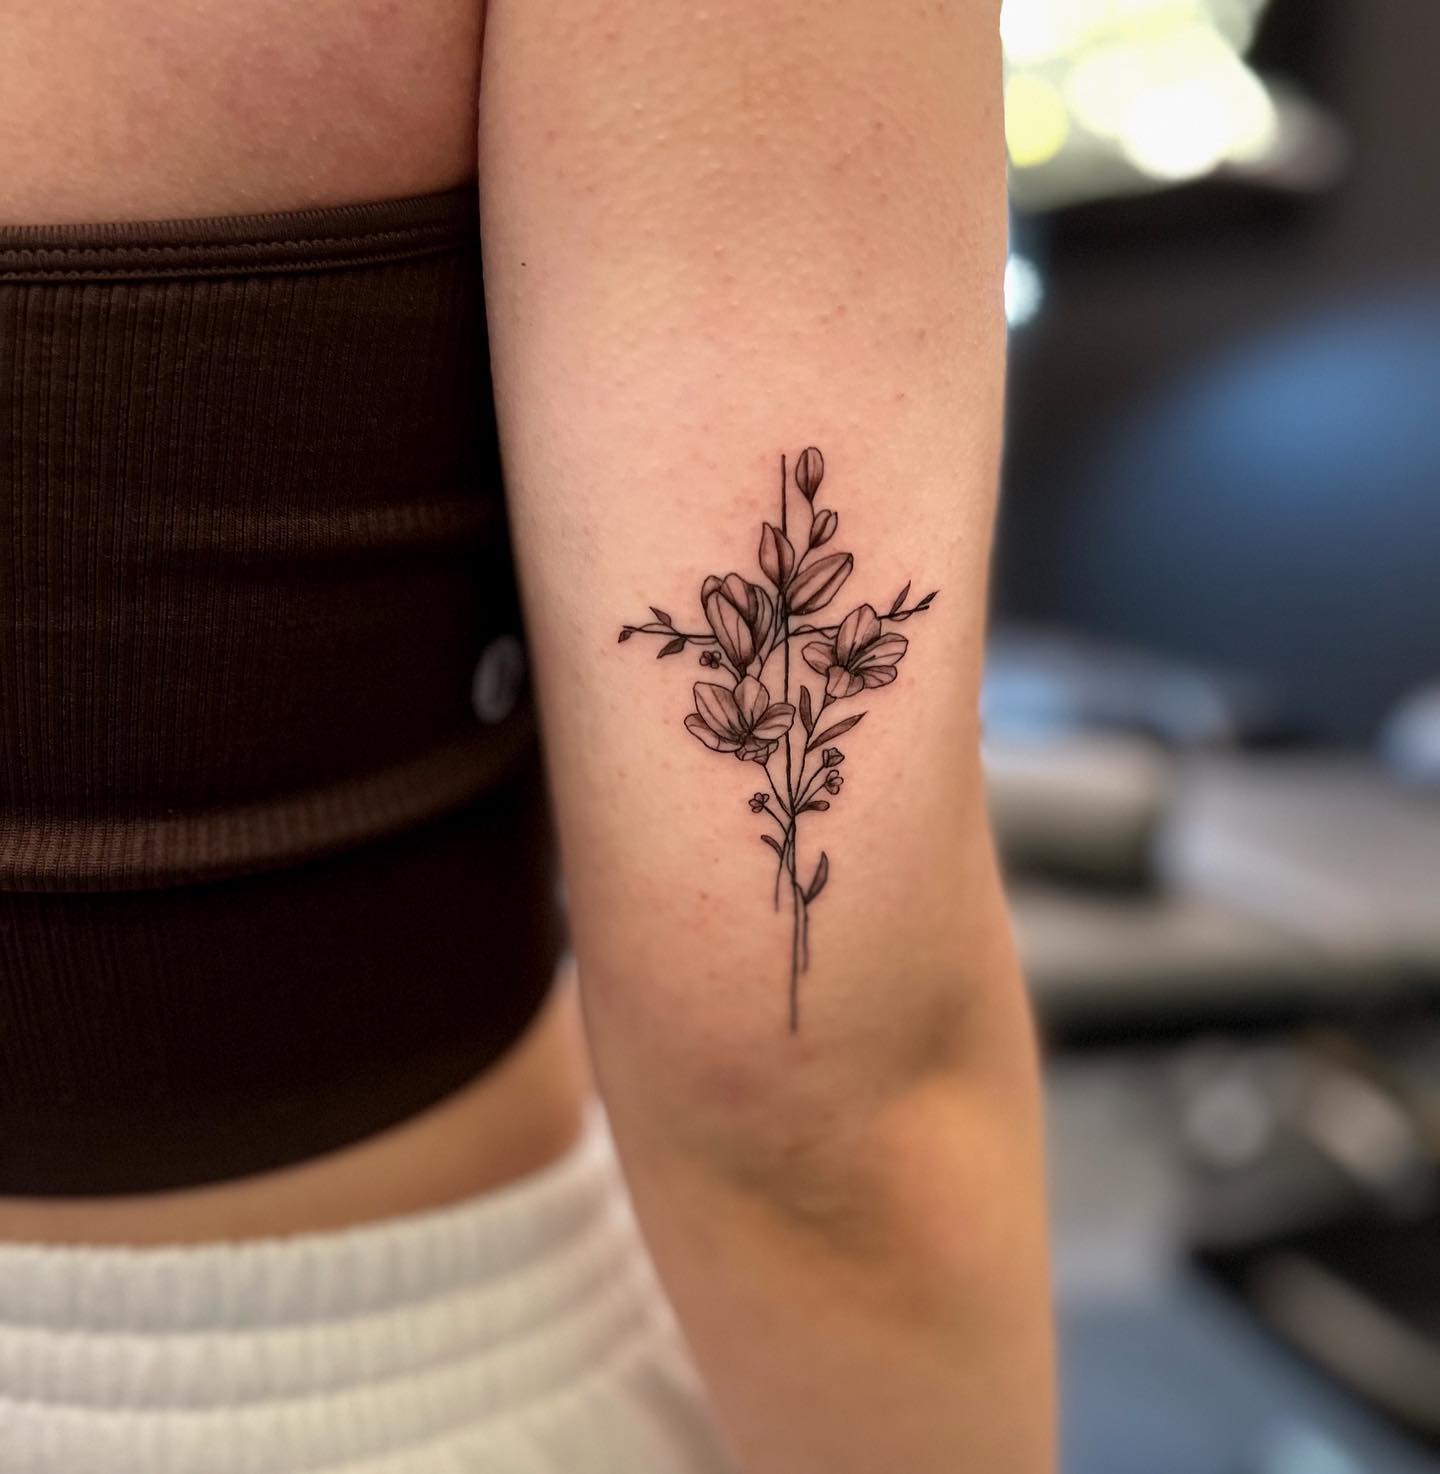 Did you know that in ancient cultures, flowers were used as a symbol of god's contentment? This meaning makes it a perfect choice for a cross tattoo. A thin line of cross is decorated with flowers above and it looks adorable. Go for it.